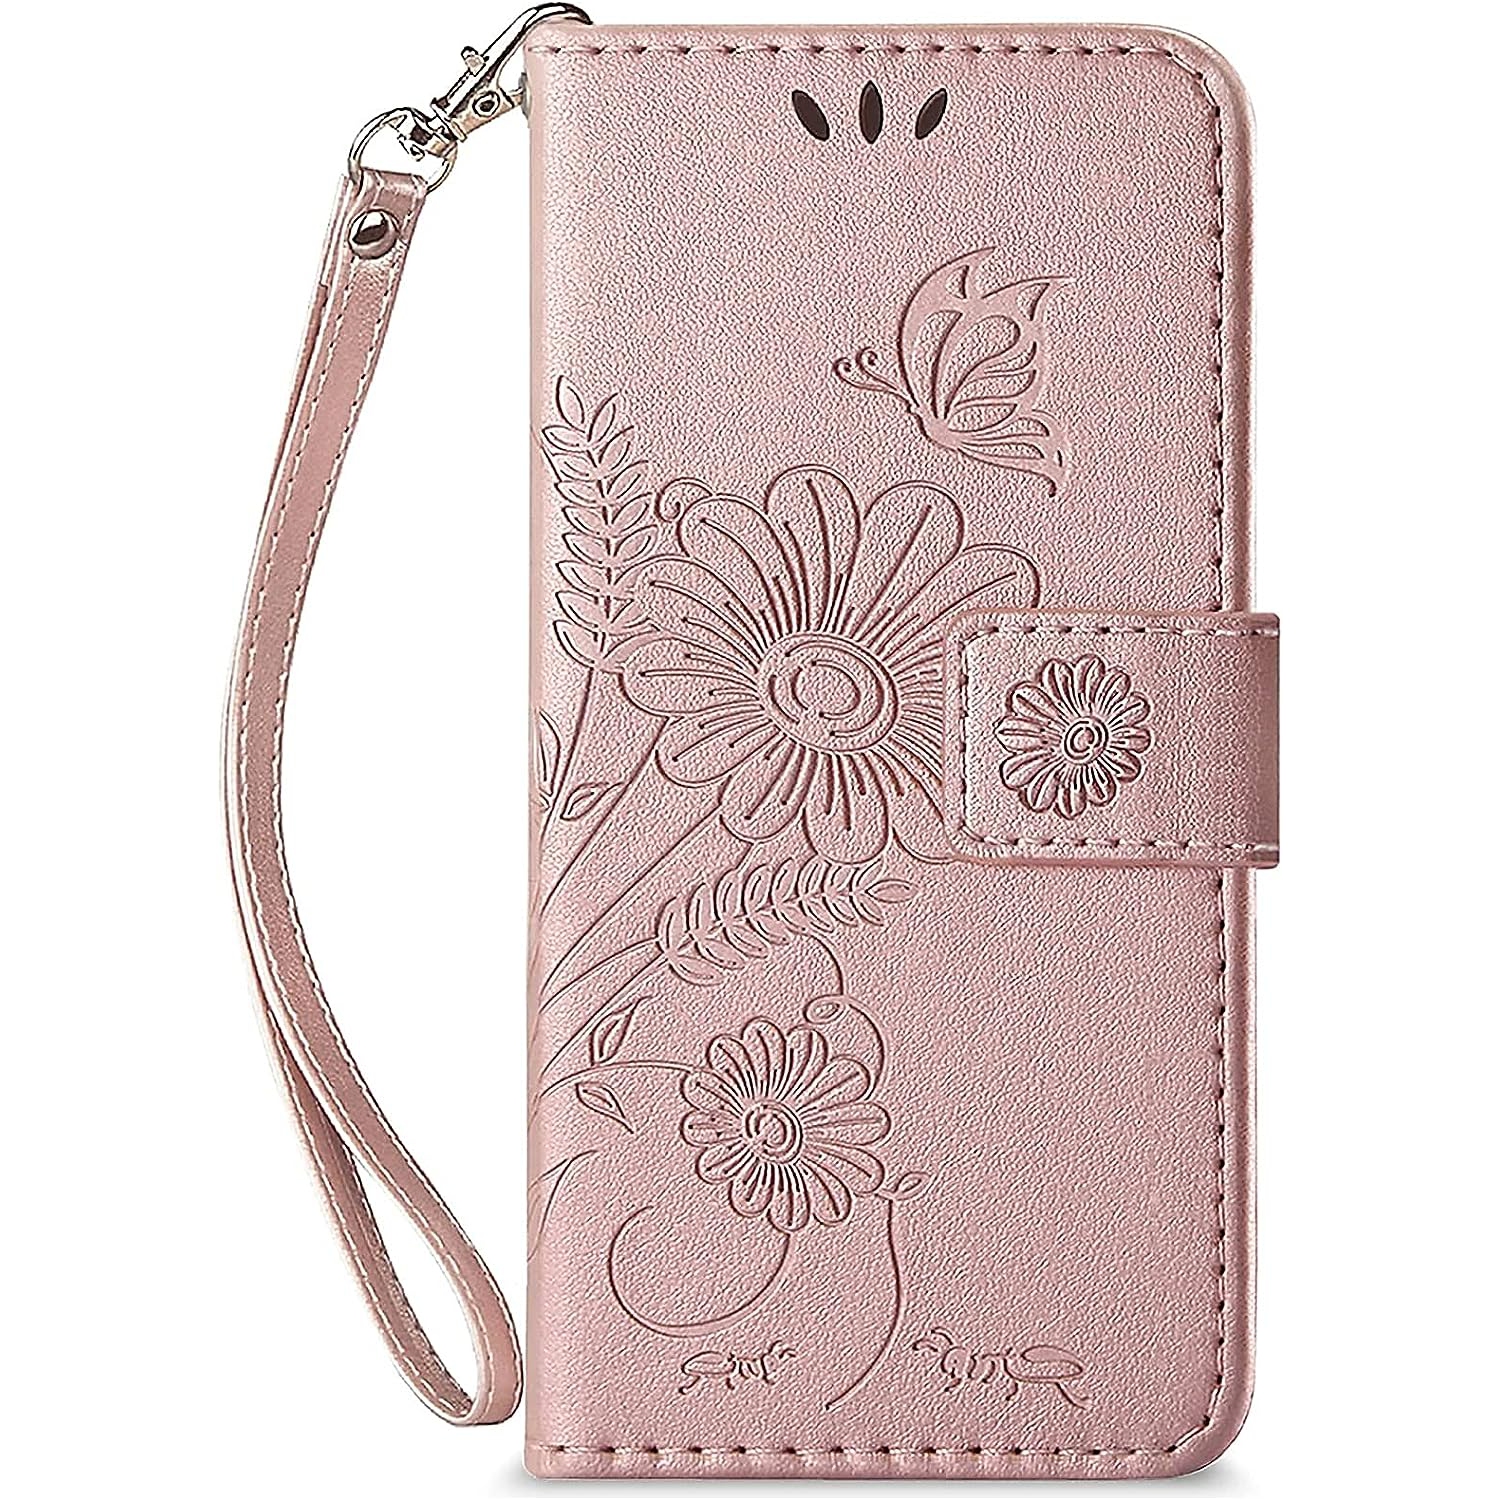 Leather Wallet Cover Phone Case for Xiaomi Mi 11 Lite 4G/5G/5G NE, with RFID Blocking Card Holder Slots (Rose